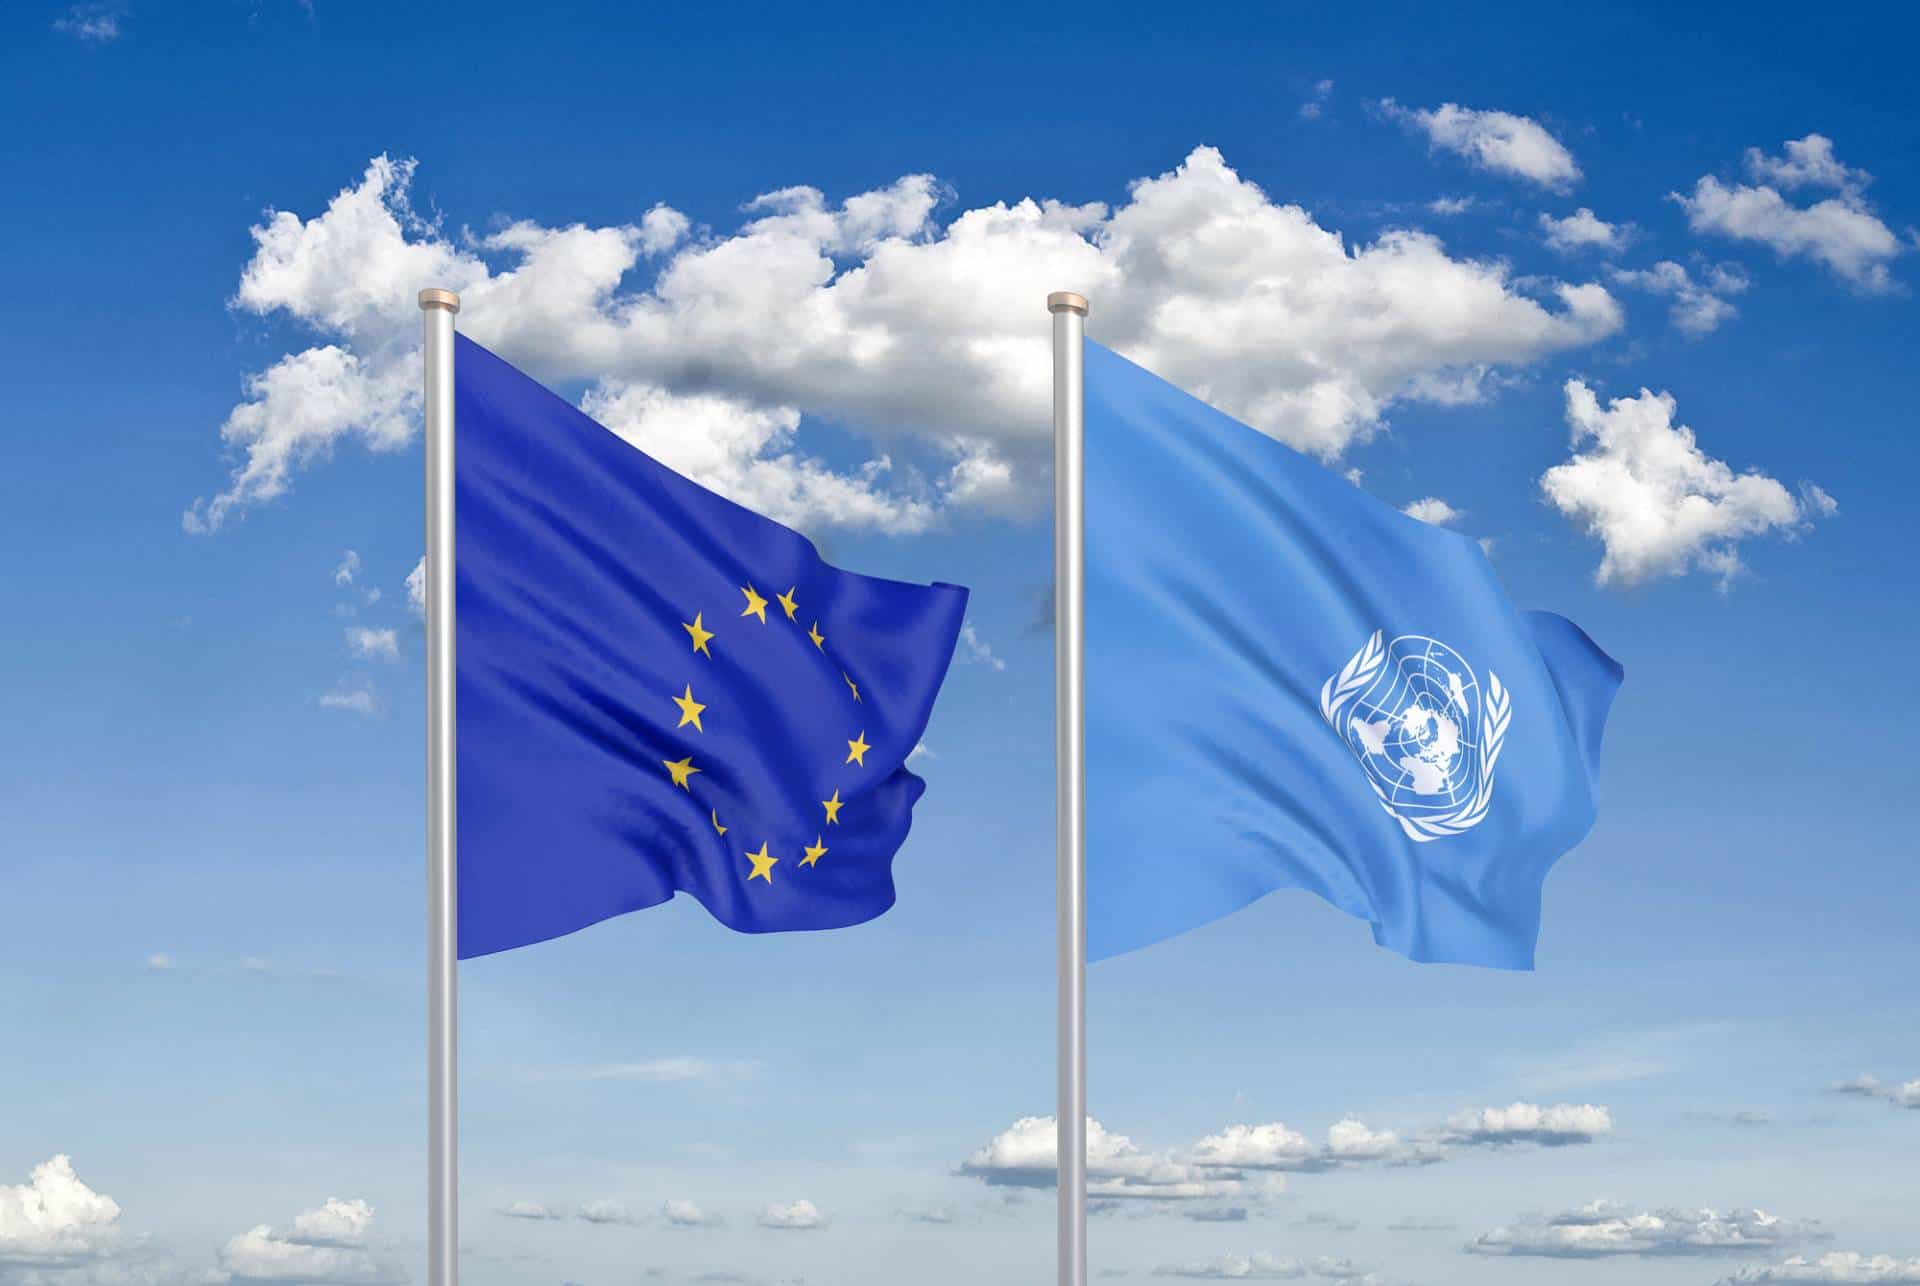 What are the differences between organizations like the EU, EC, EMU, NATO, and the UN?